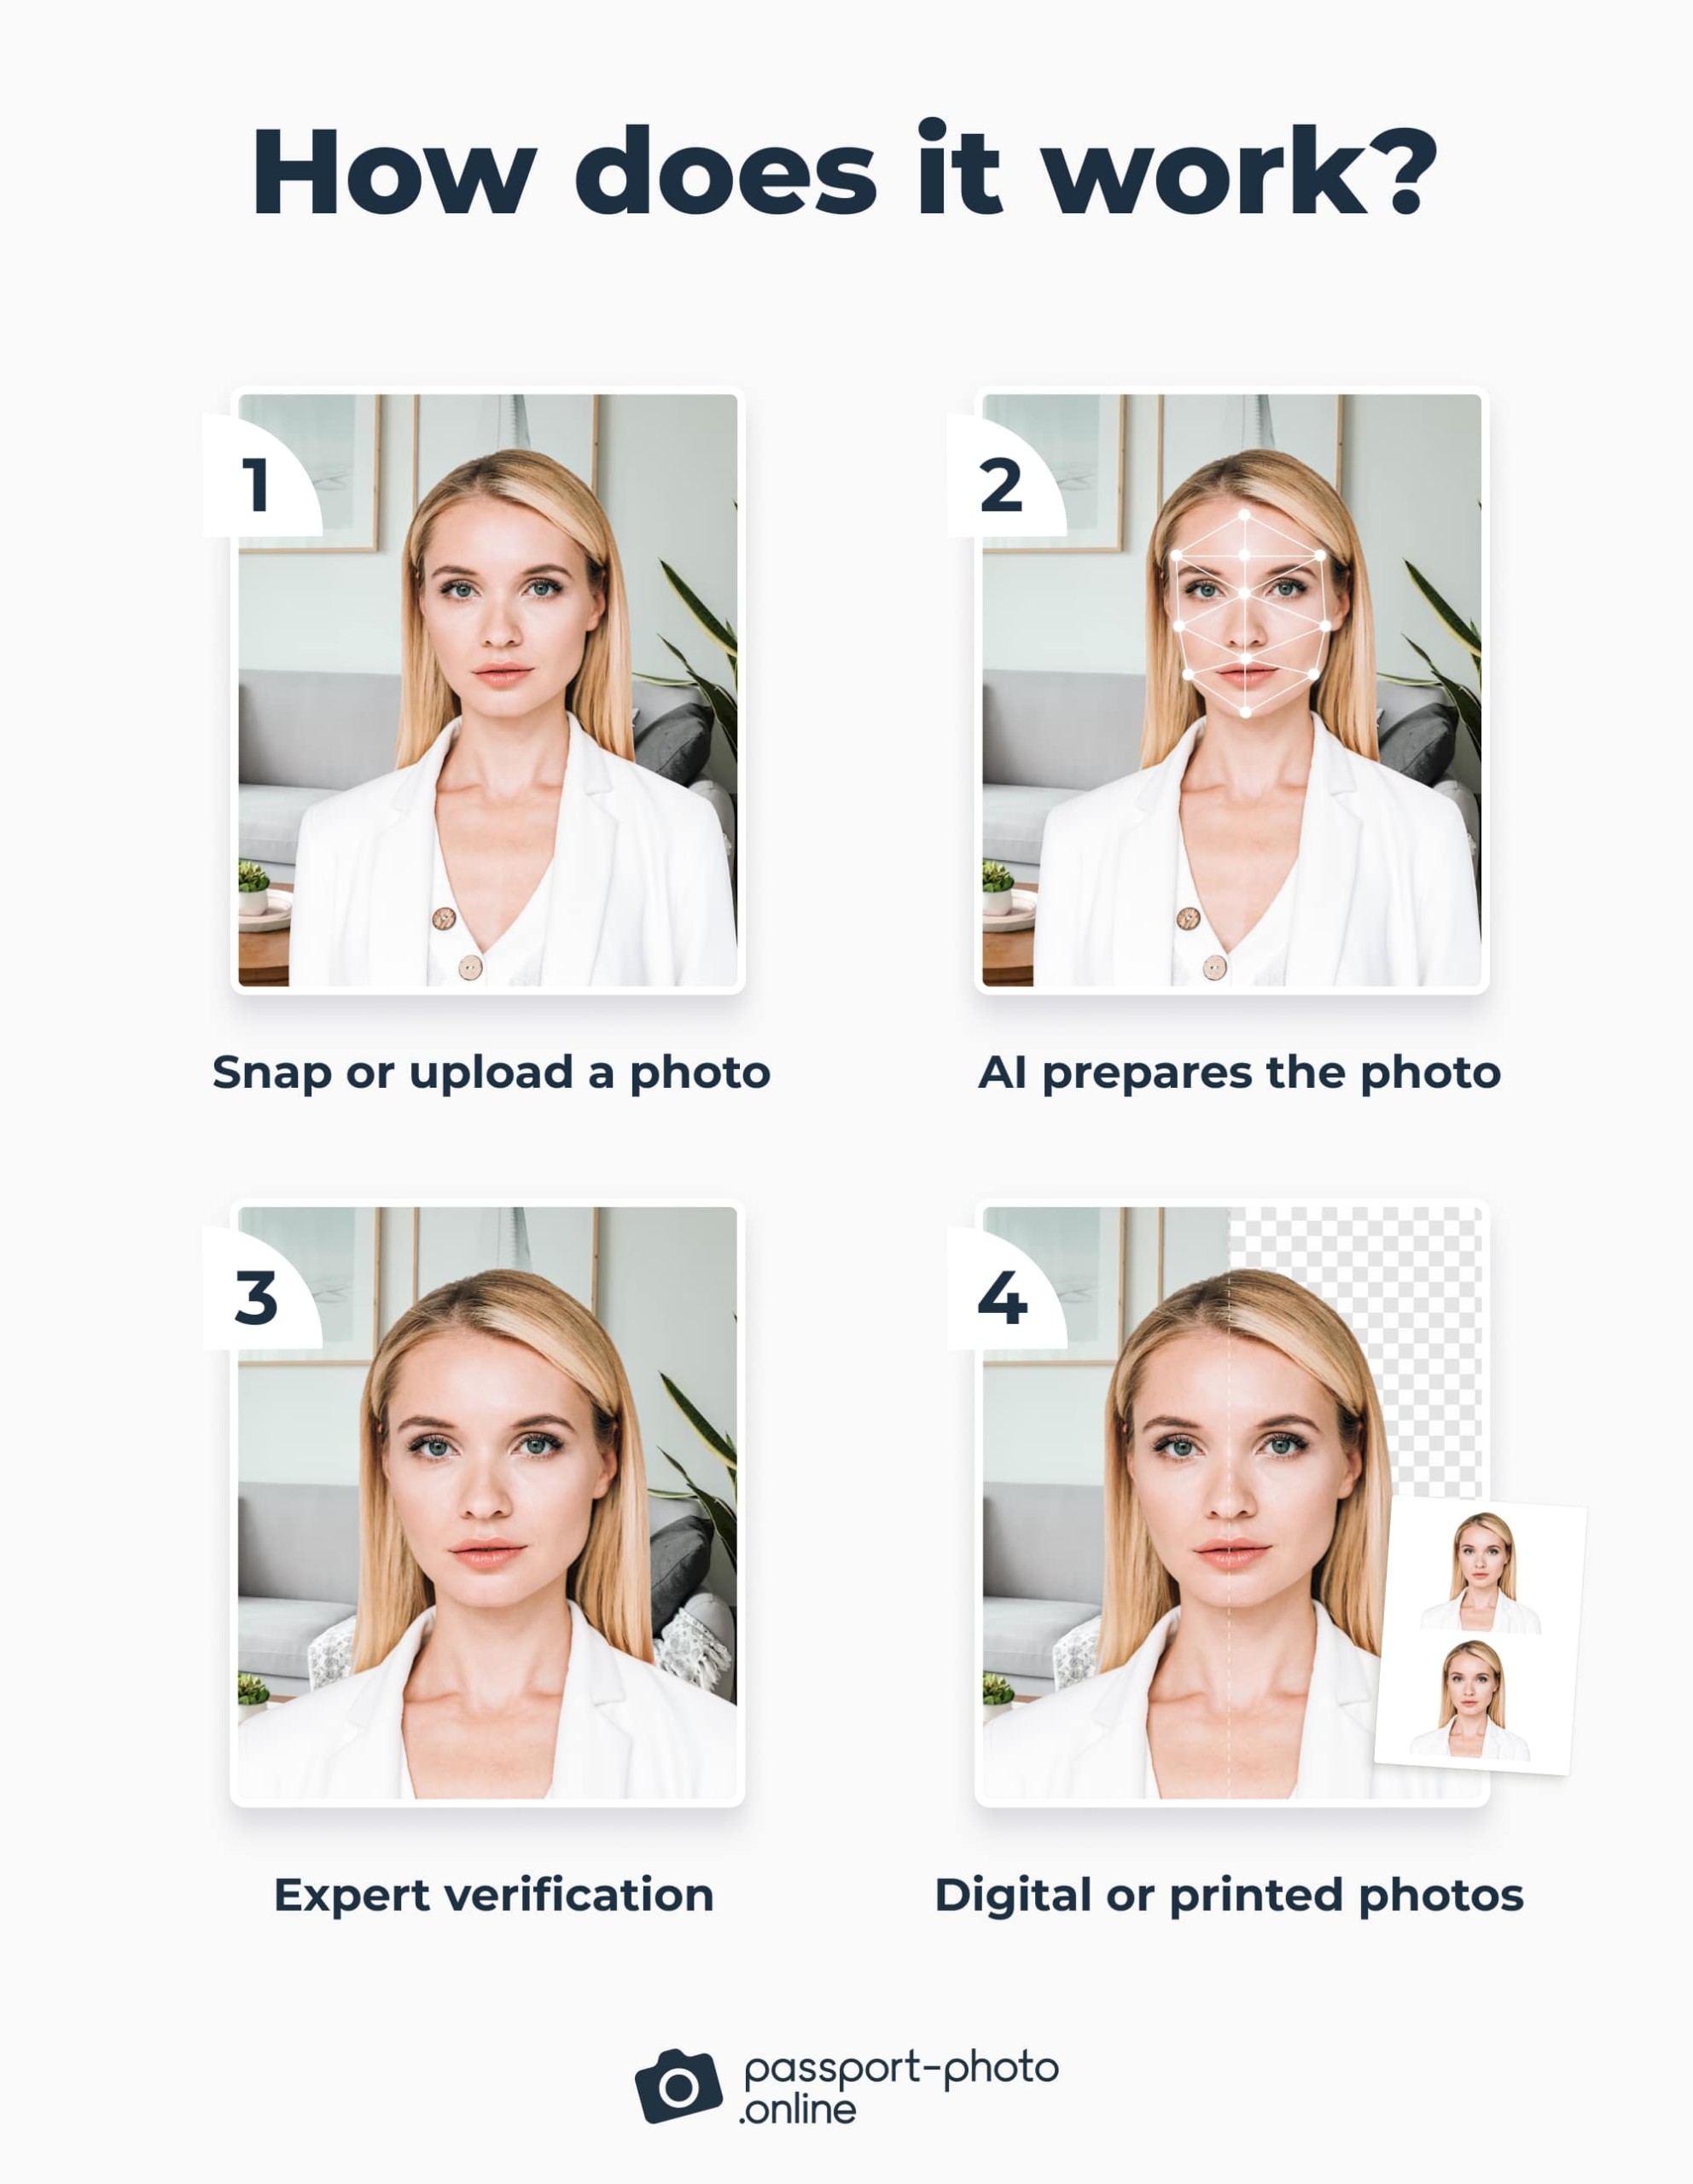 A 4-step process of creating a passport photo with Passport Photo Online.